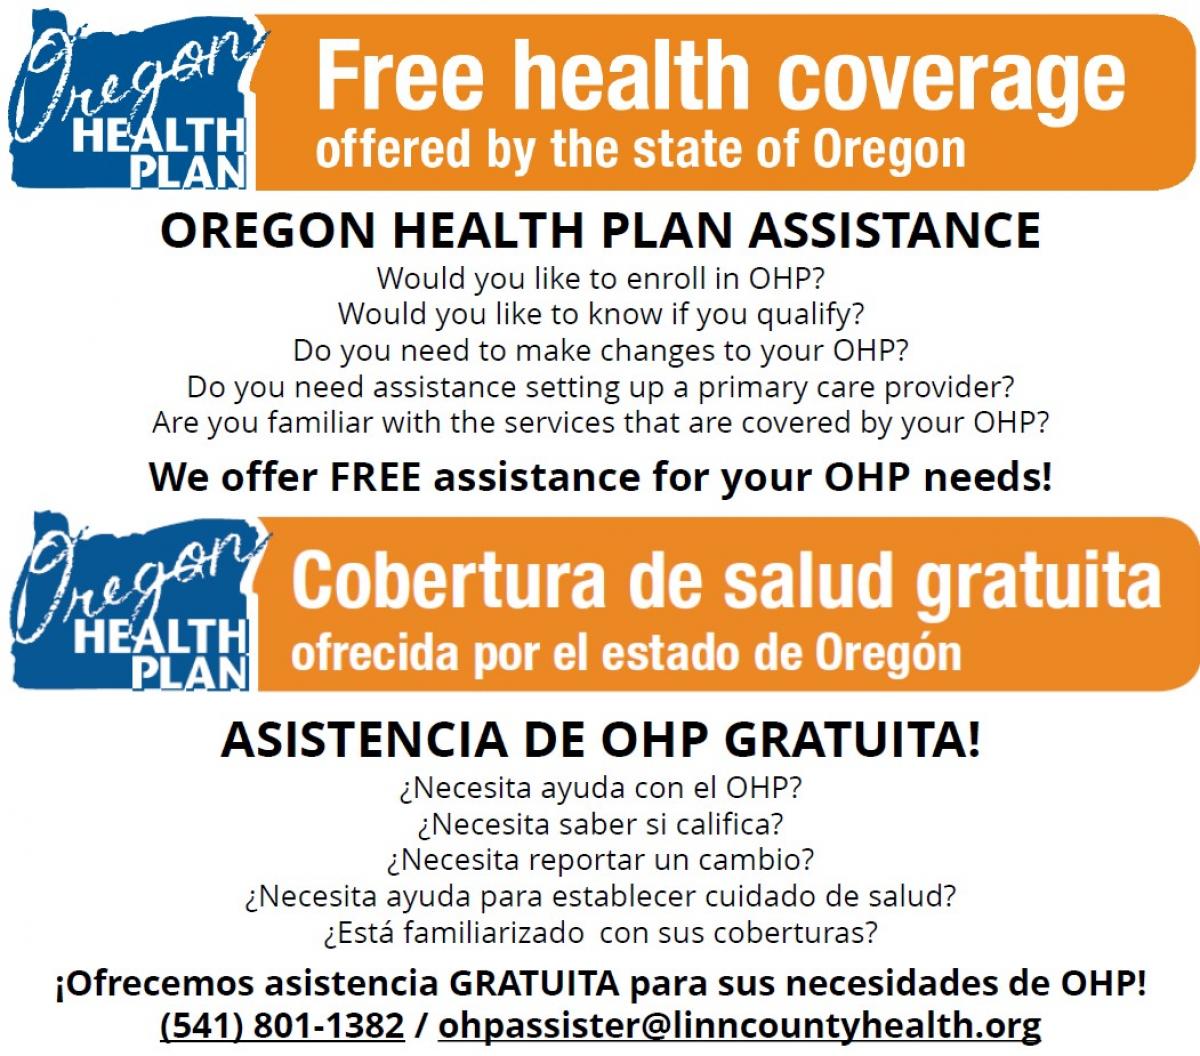 OHP assistance information